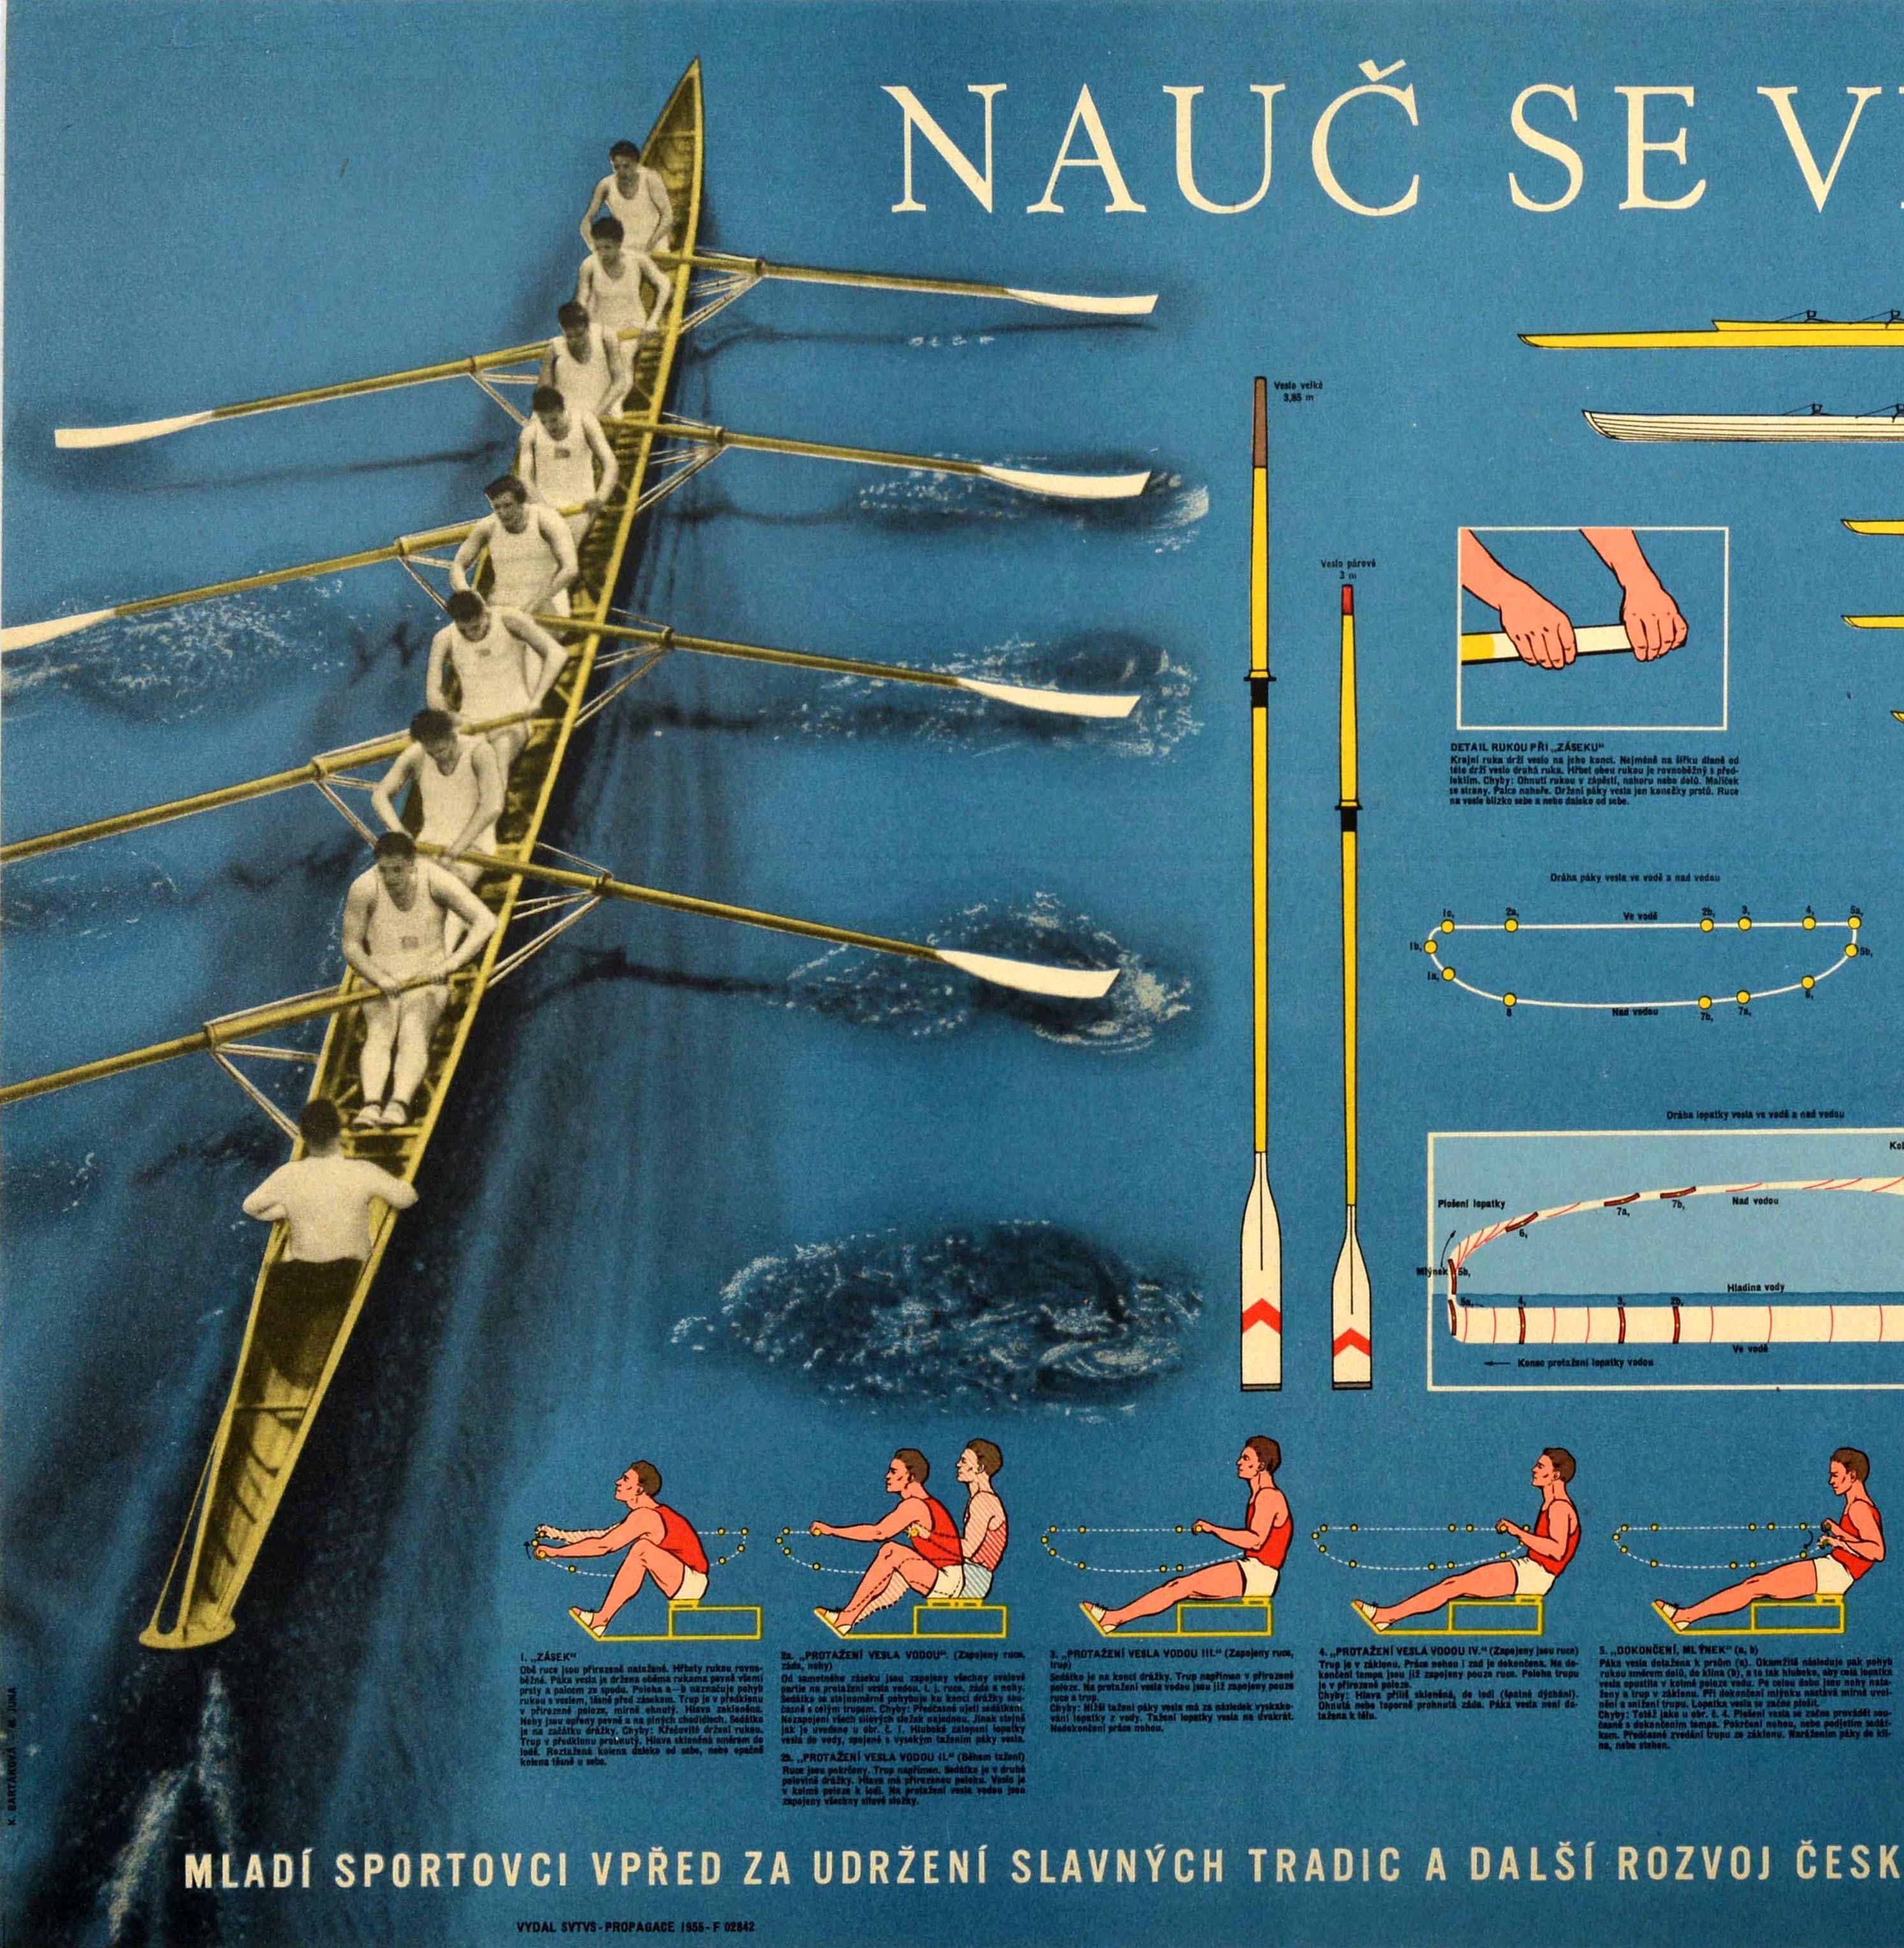 Original vintage sport poster - Nauc Se Veslovat / Learn To Row - featuring a black and white photo of a crew of eight rowers with a coxswain rowing against the blue background on the side of artwork showing technical diagrams of how to row depicted